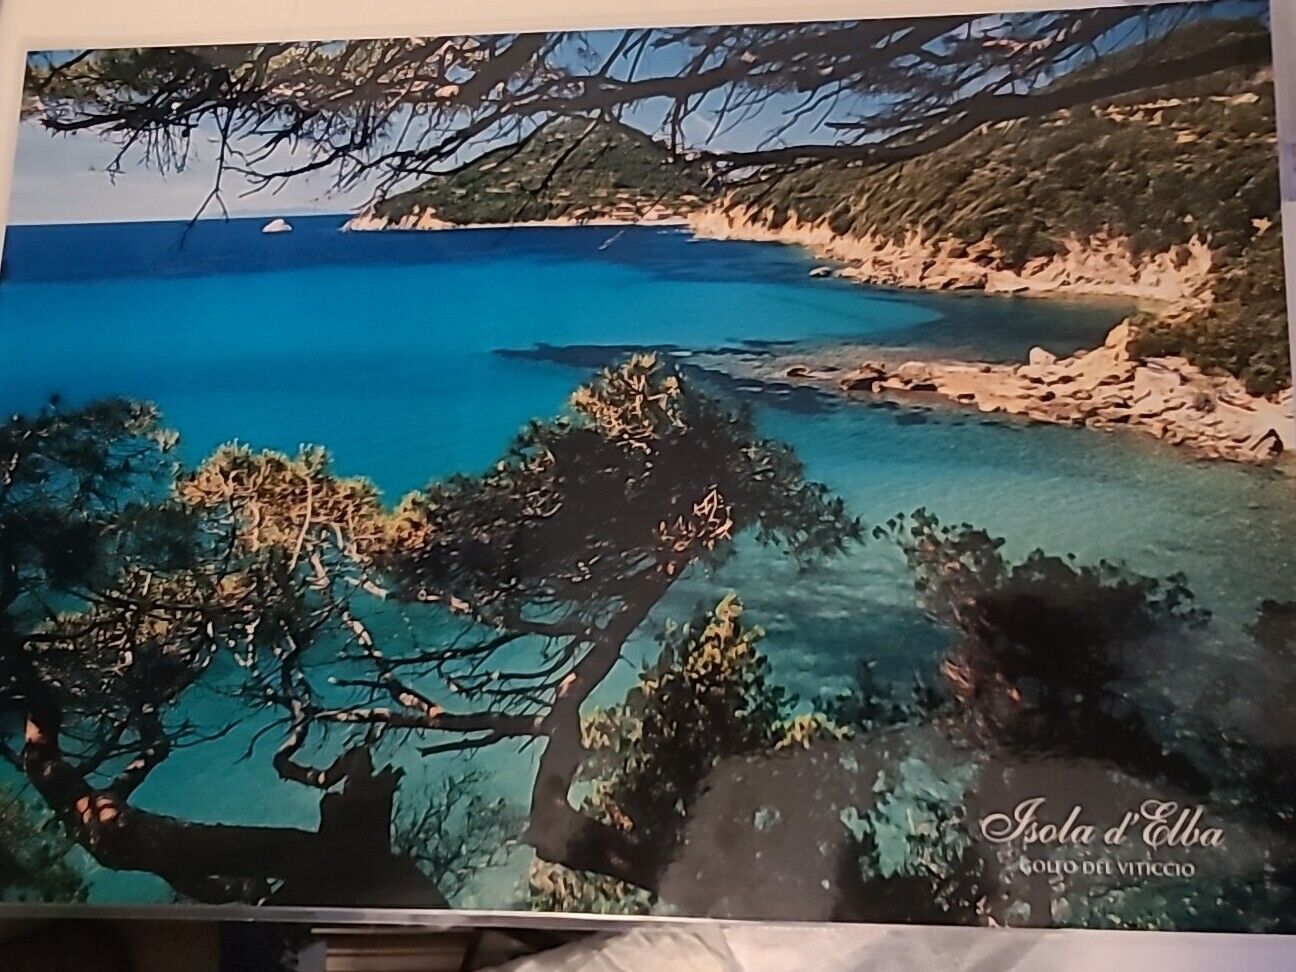 Laminated Table Mat Double Sided From Isola D' Elba And 26 Beach Pics On Back